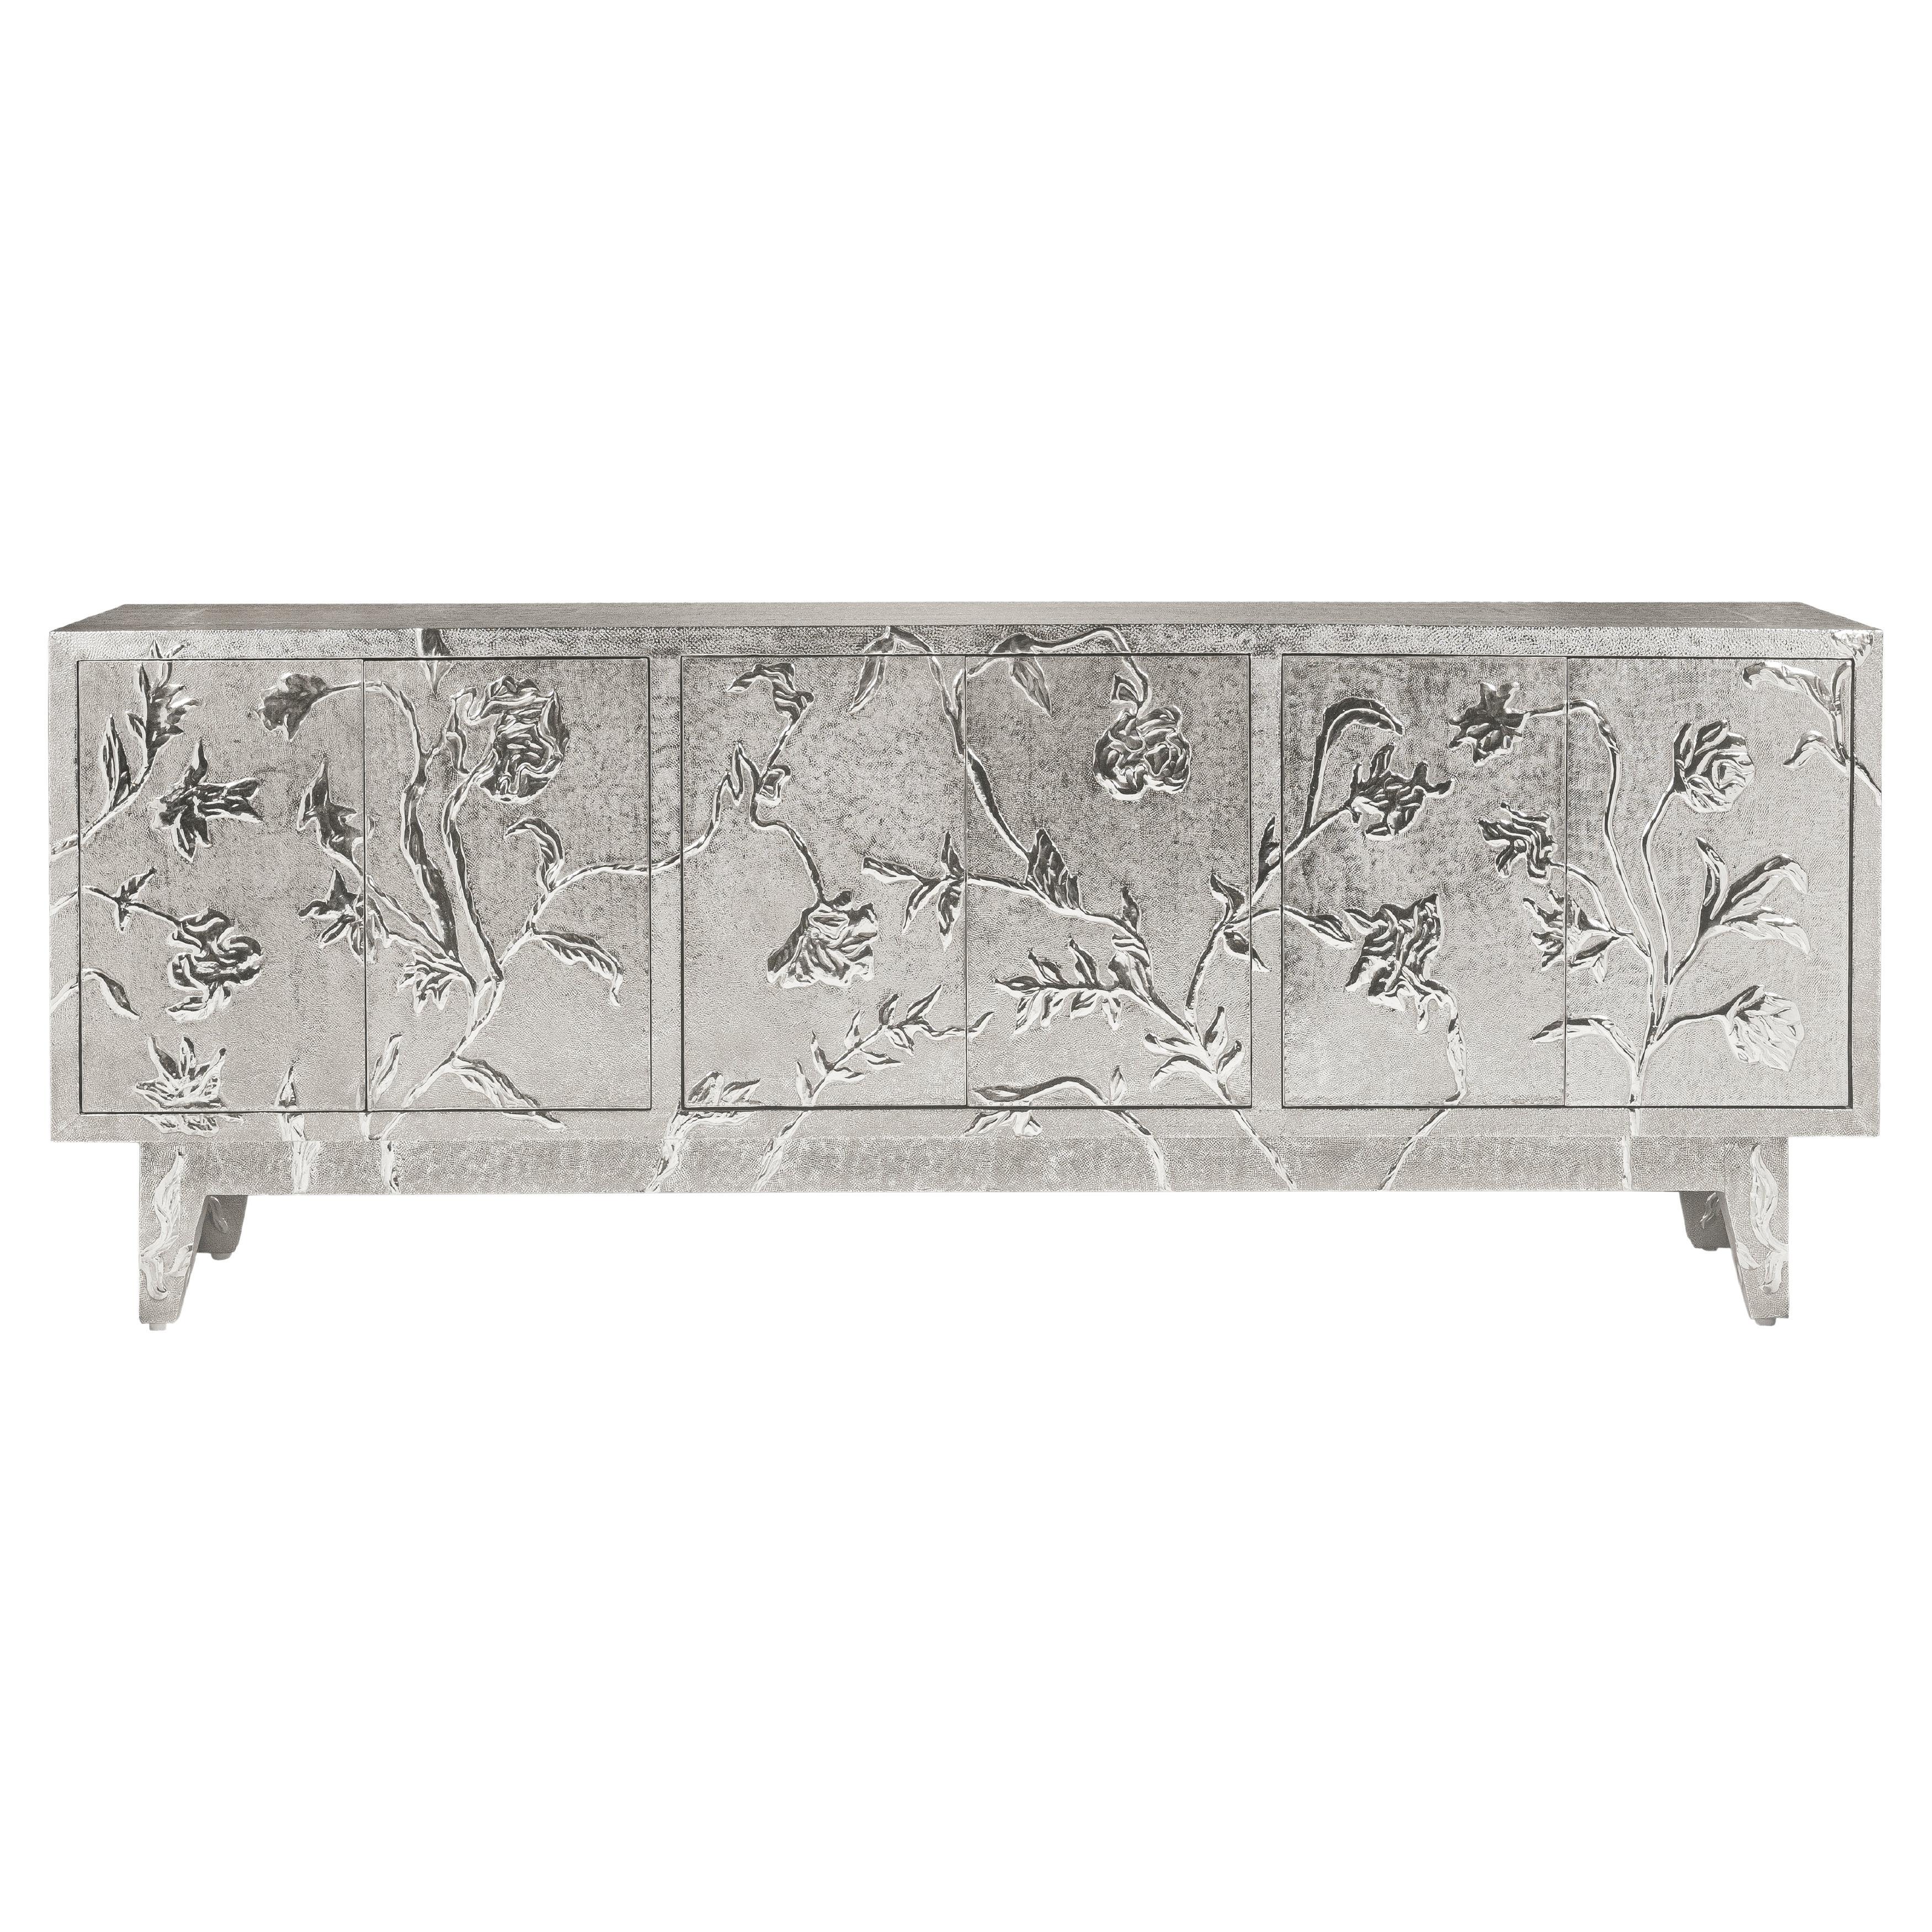 Indian Art Deco Buffet Sideboard in Floral Design by Stephanie Odegard For Sale